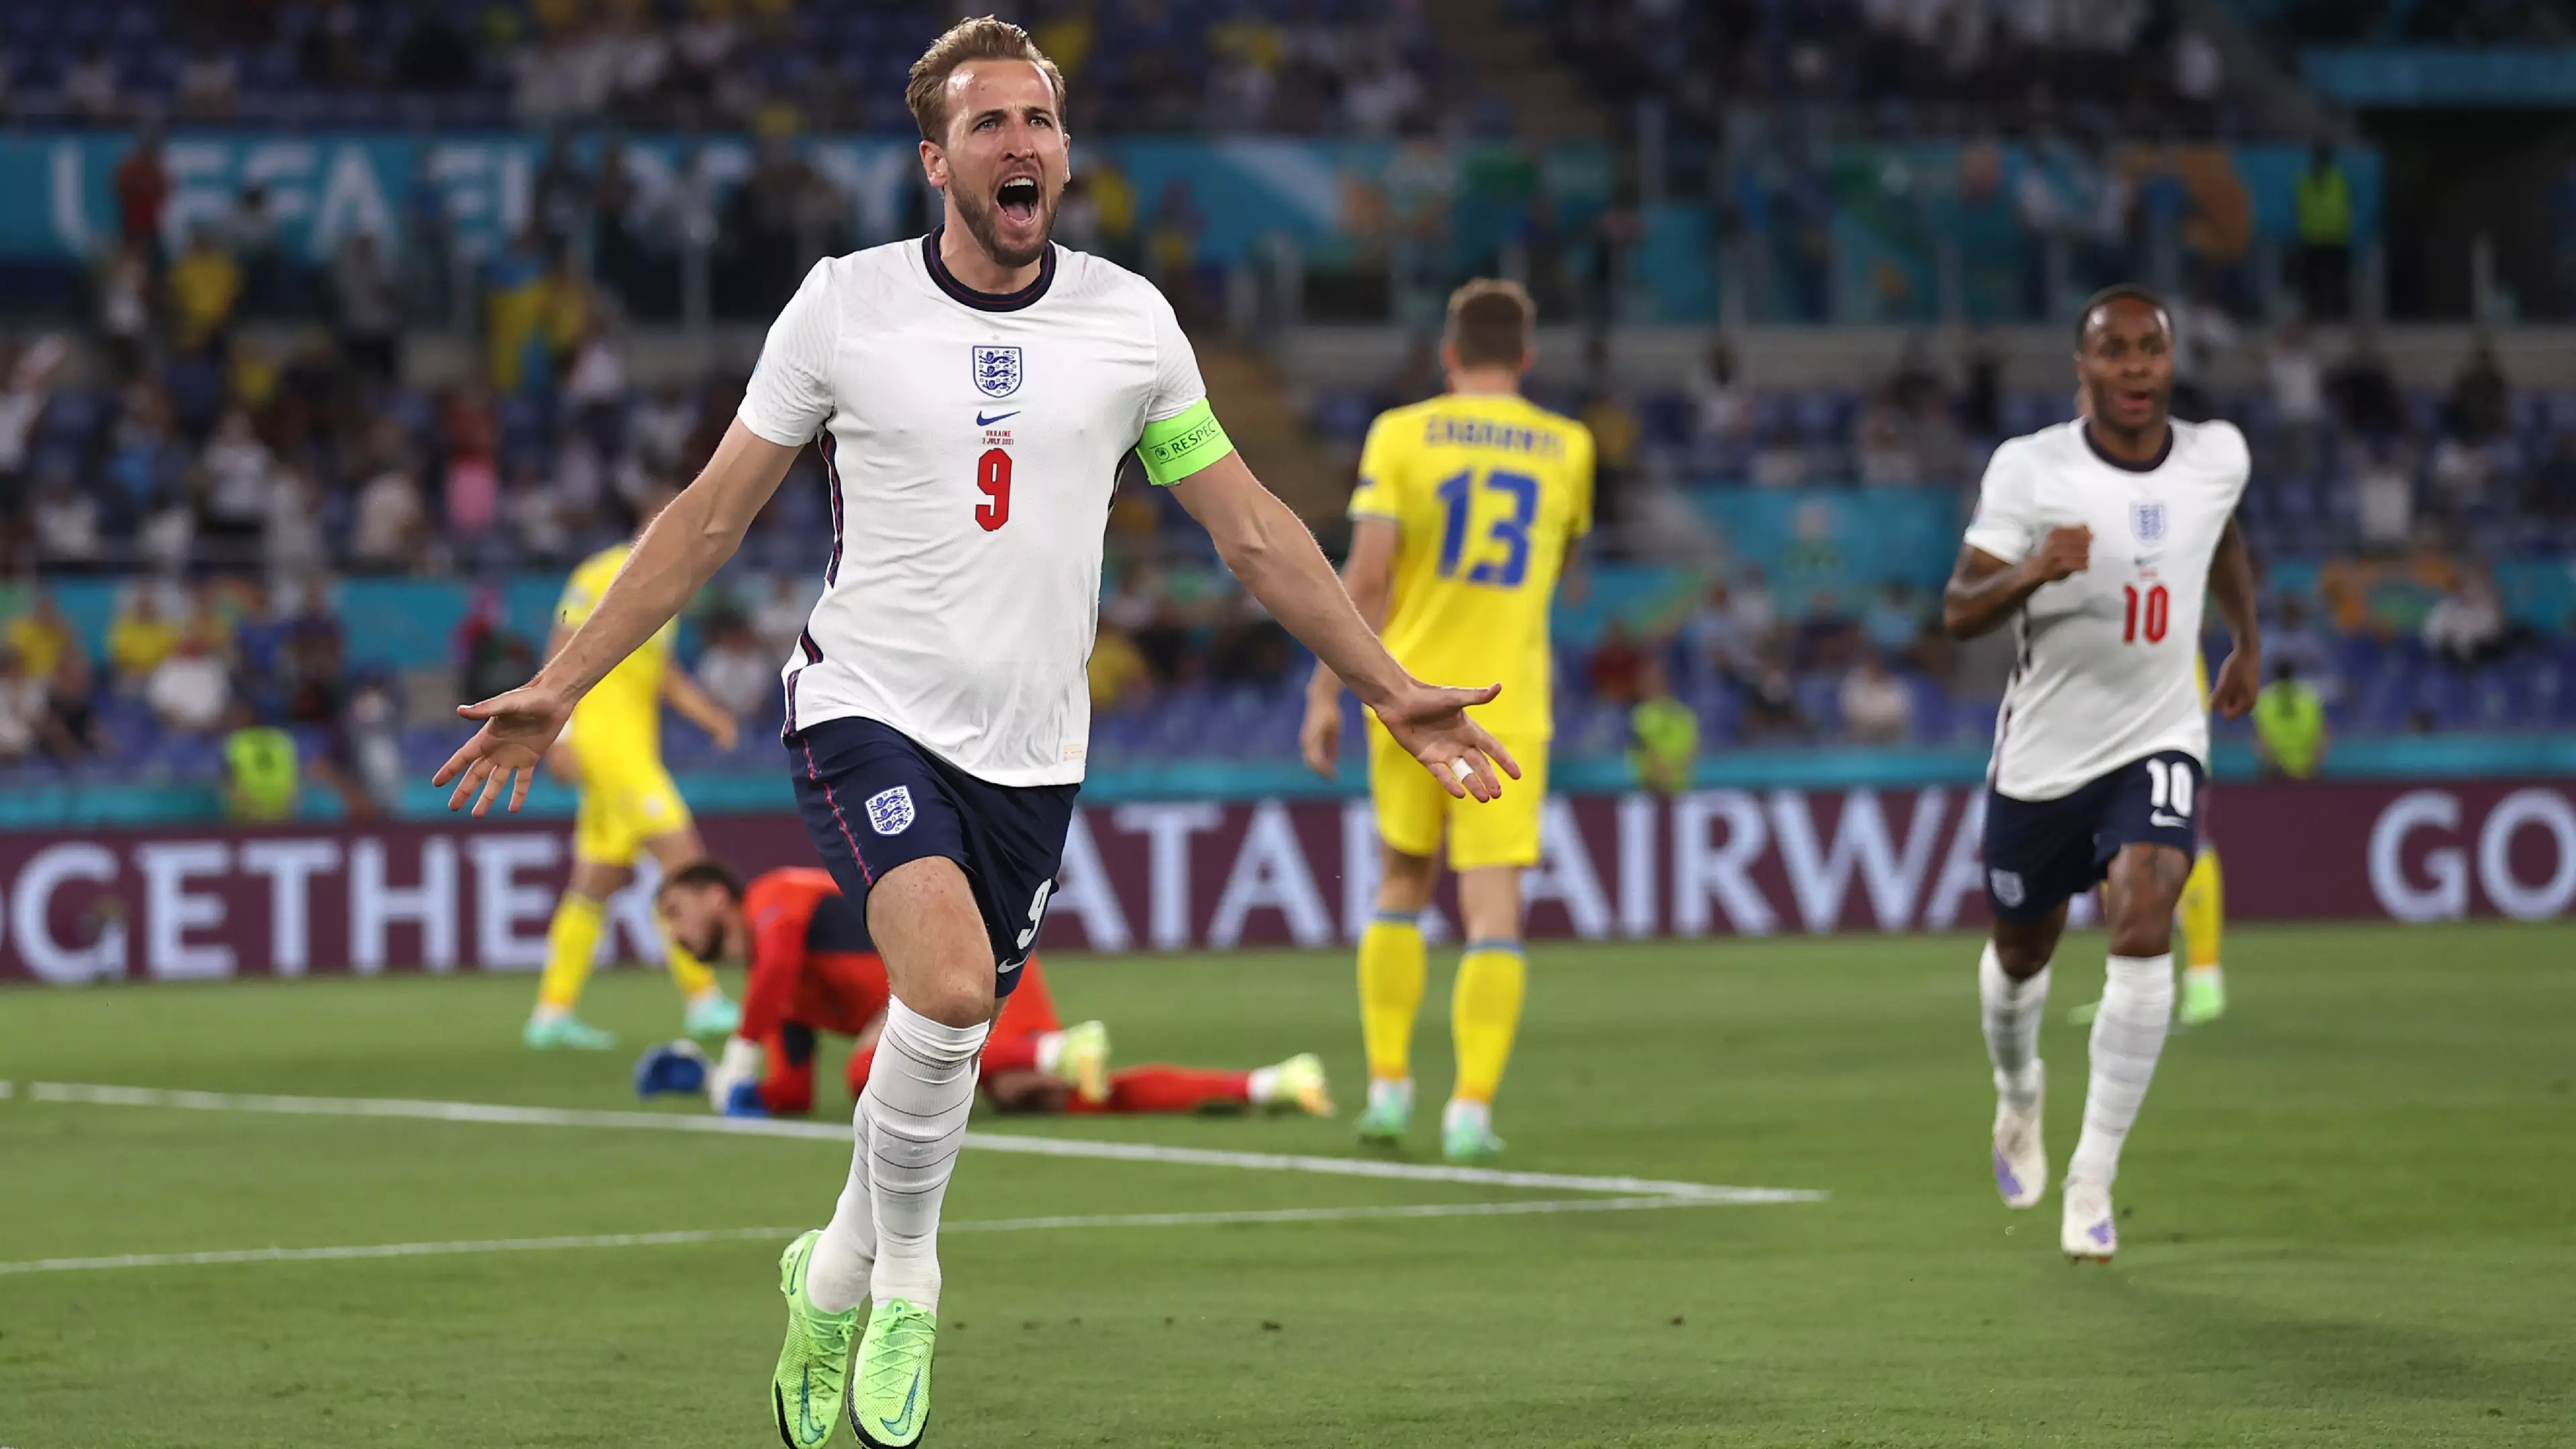 England Will Face Denmark In The Semi-Finals Of Euro 2020 On Wednesday